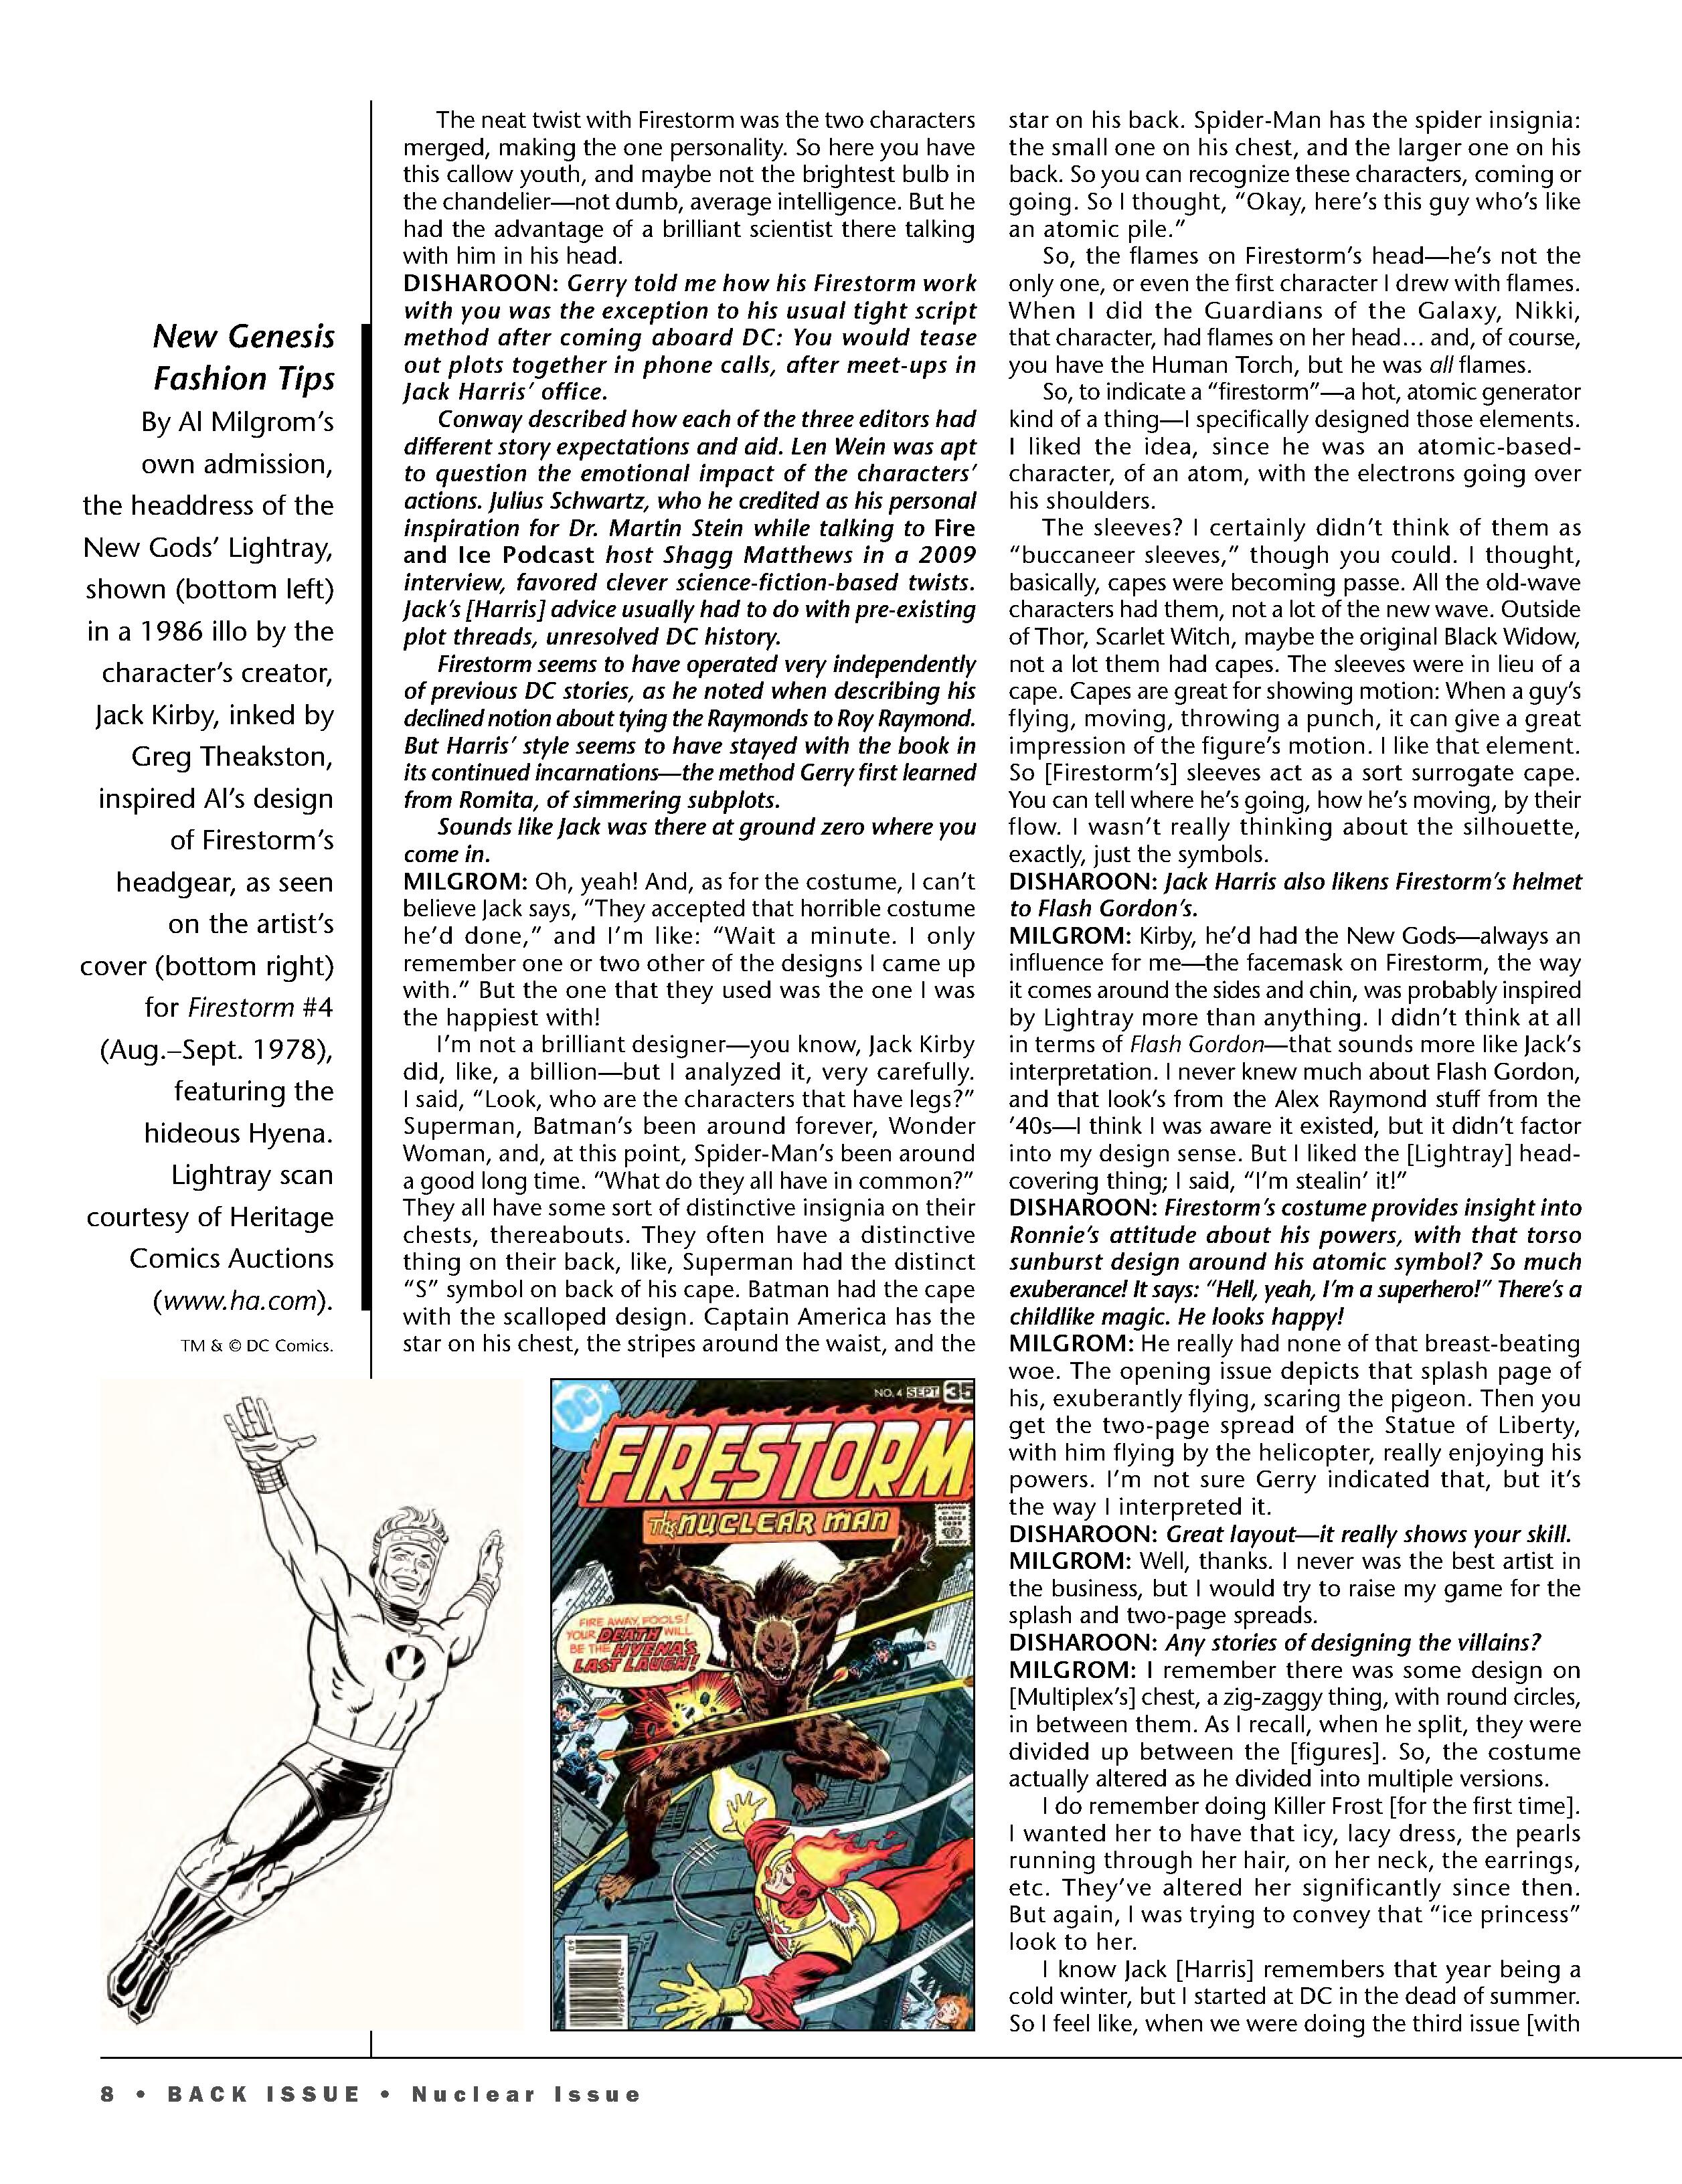 Read online Back Issue comic -  Issue #112 - 10